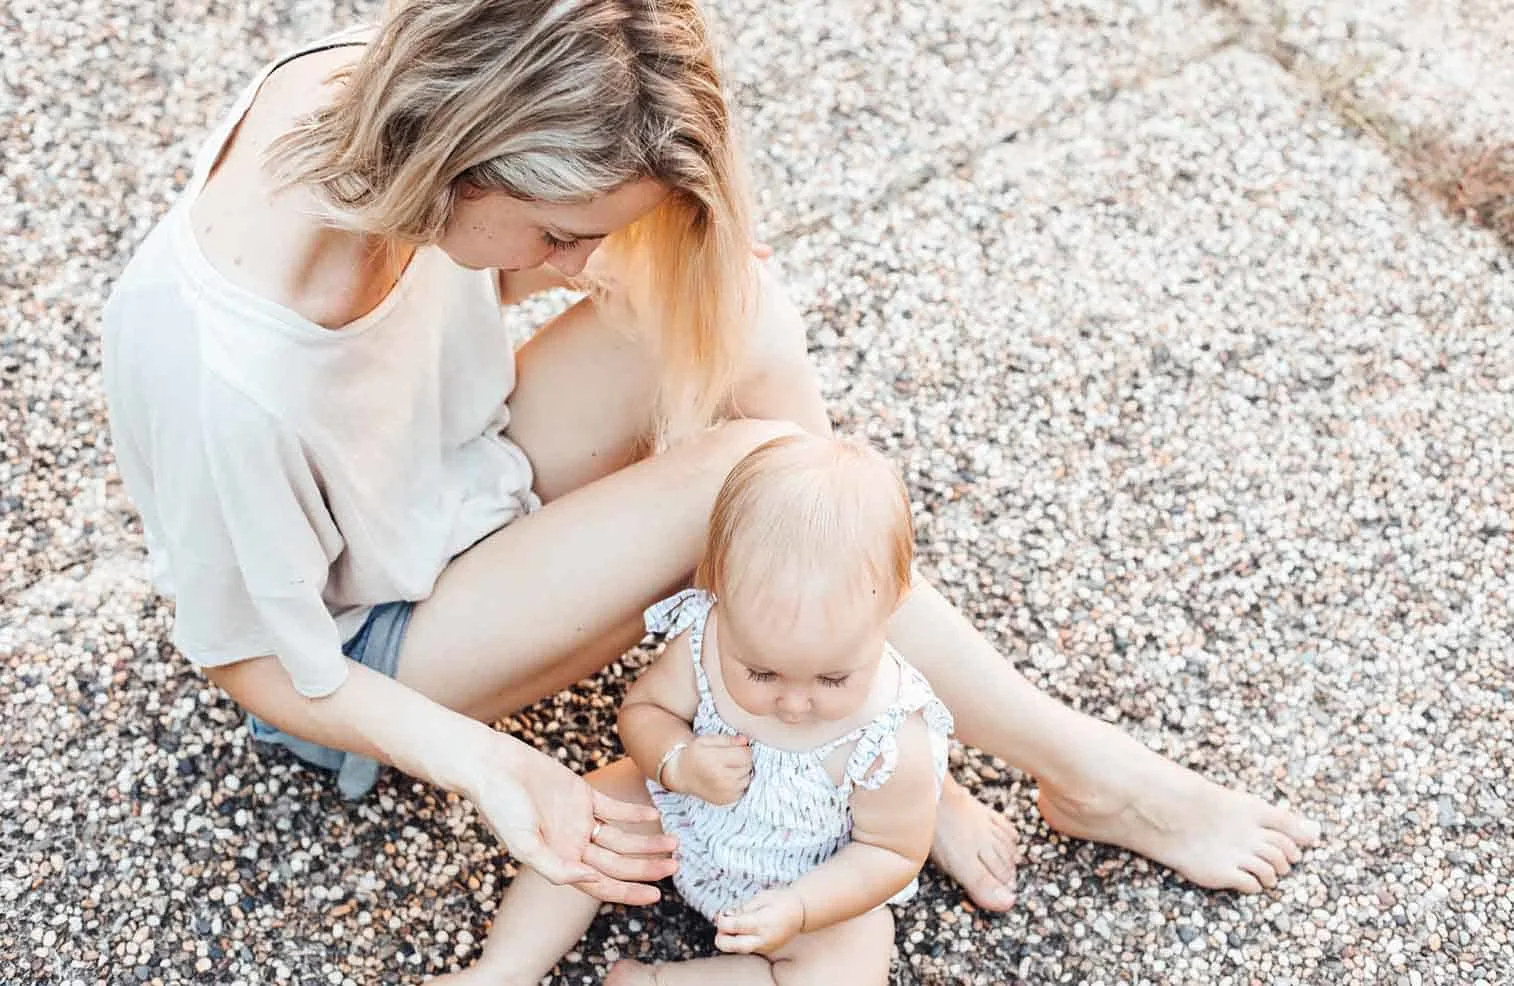 When you're a new mom, the idea of self care seems laughable. But it is so incredibly important. Here are some self care ideas for a new mom that you can do with your baby around.